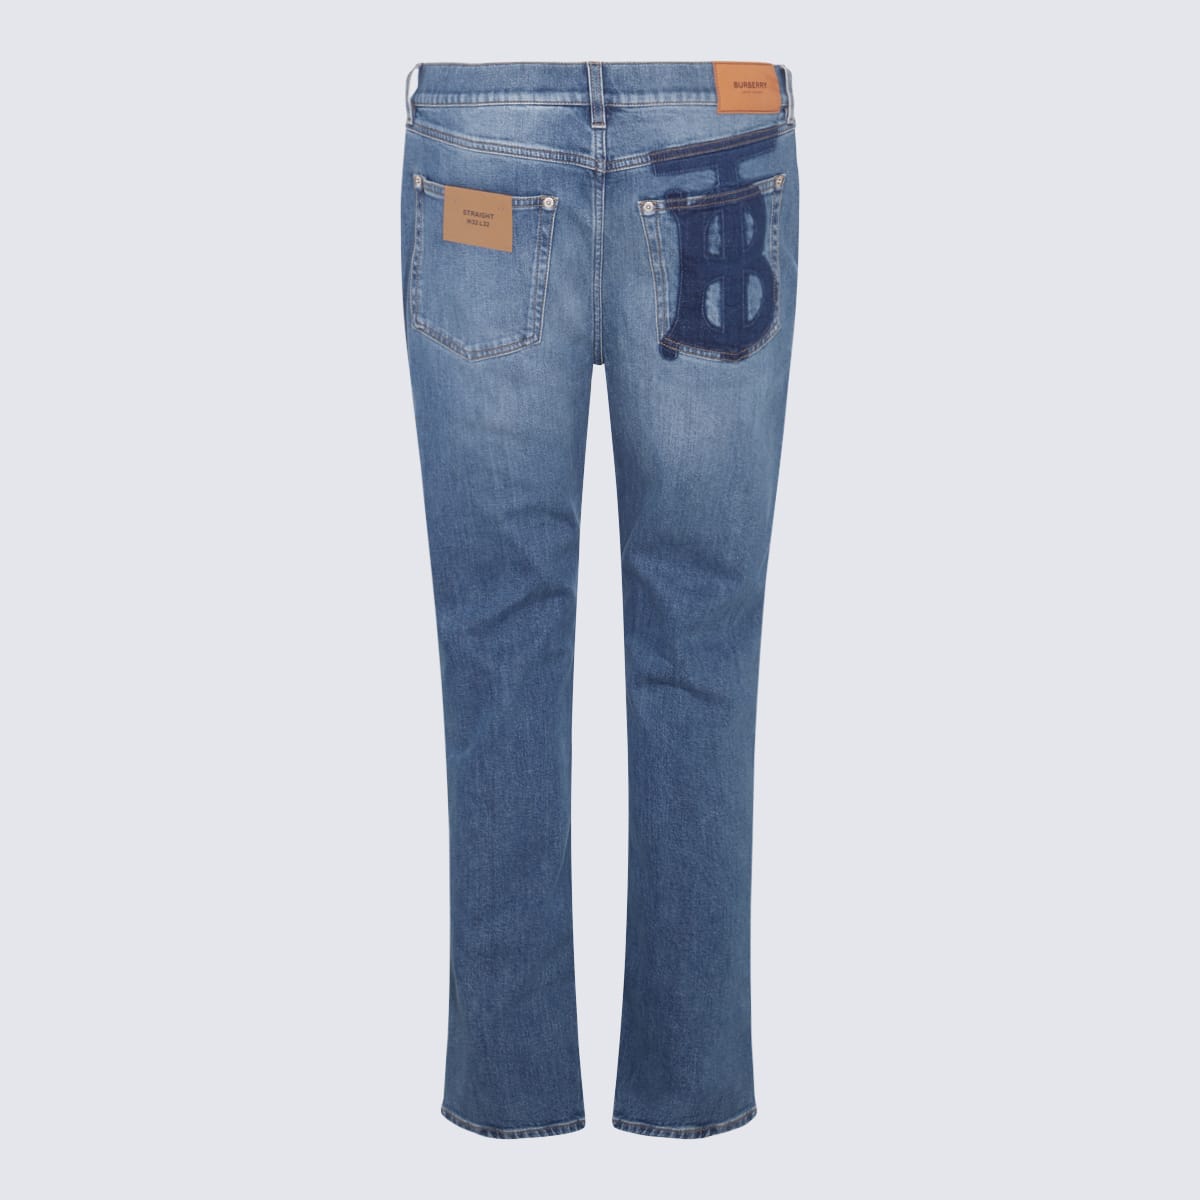 BURBERRY MUTED NAVY DENIM JEANS